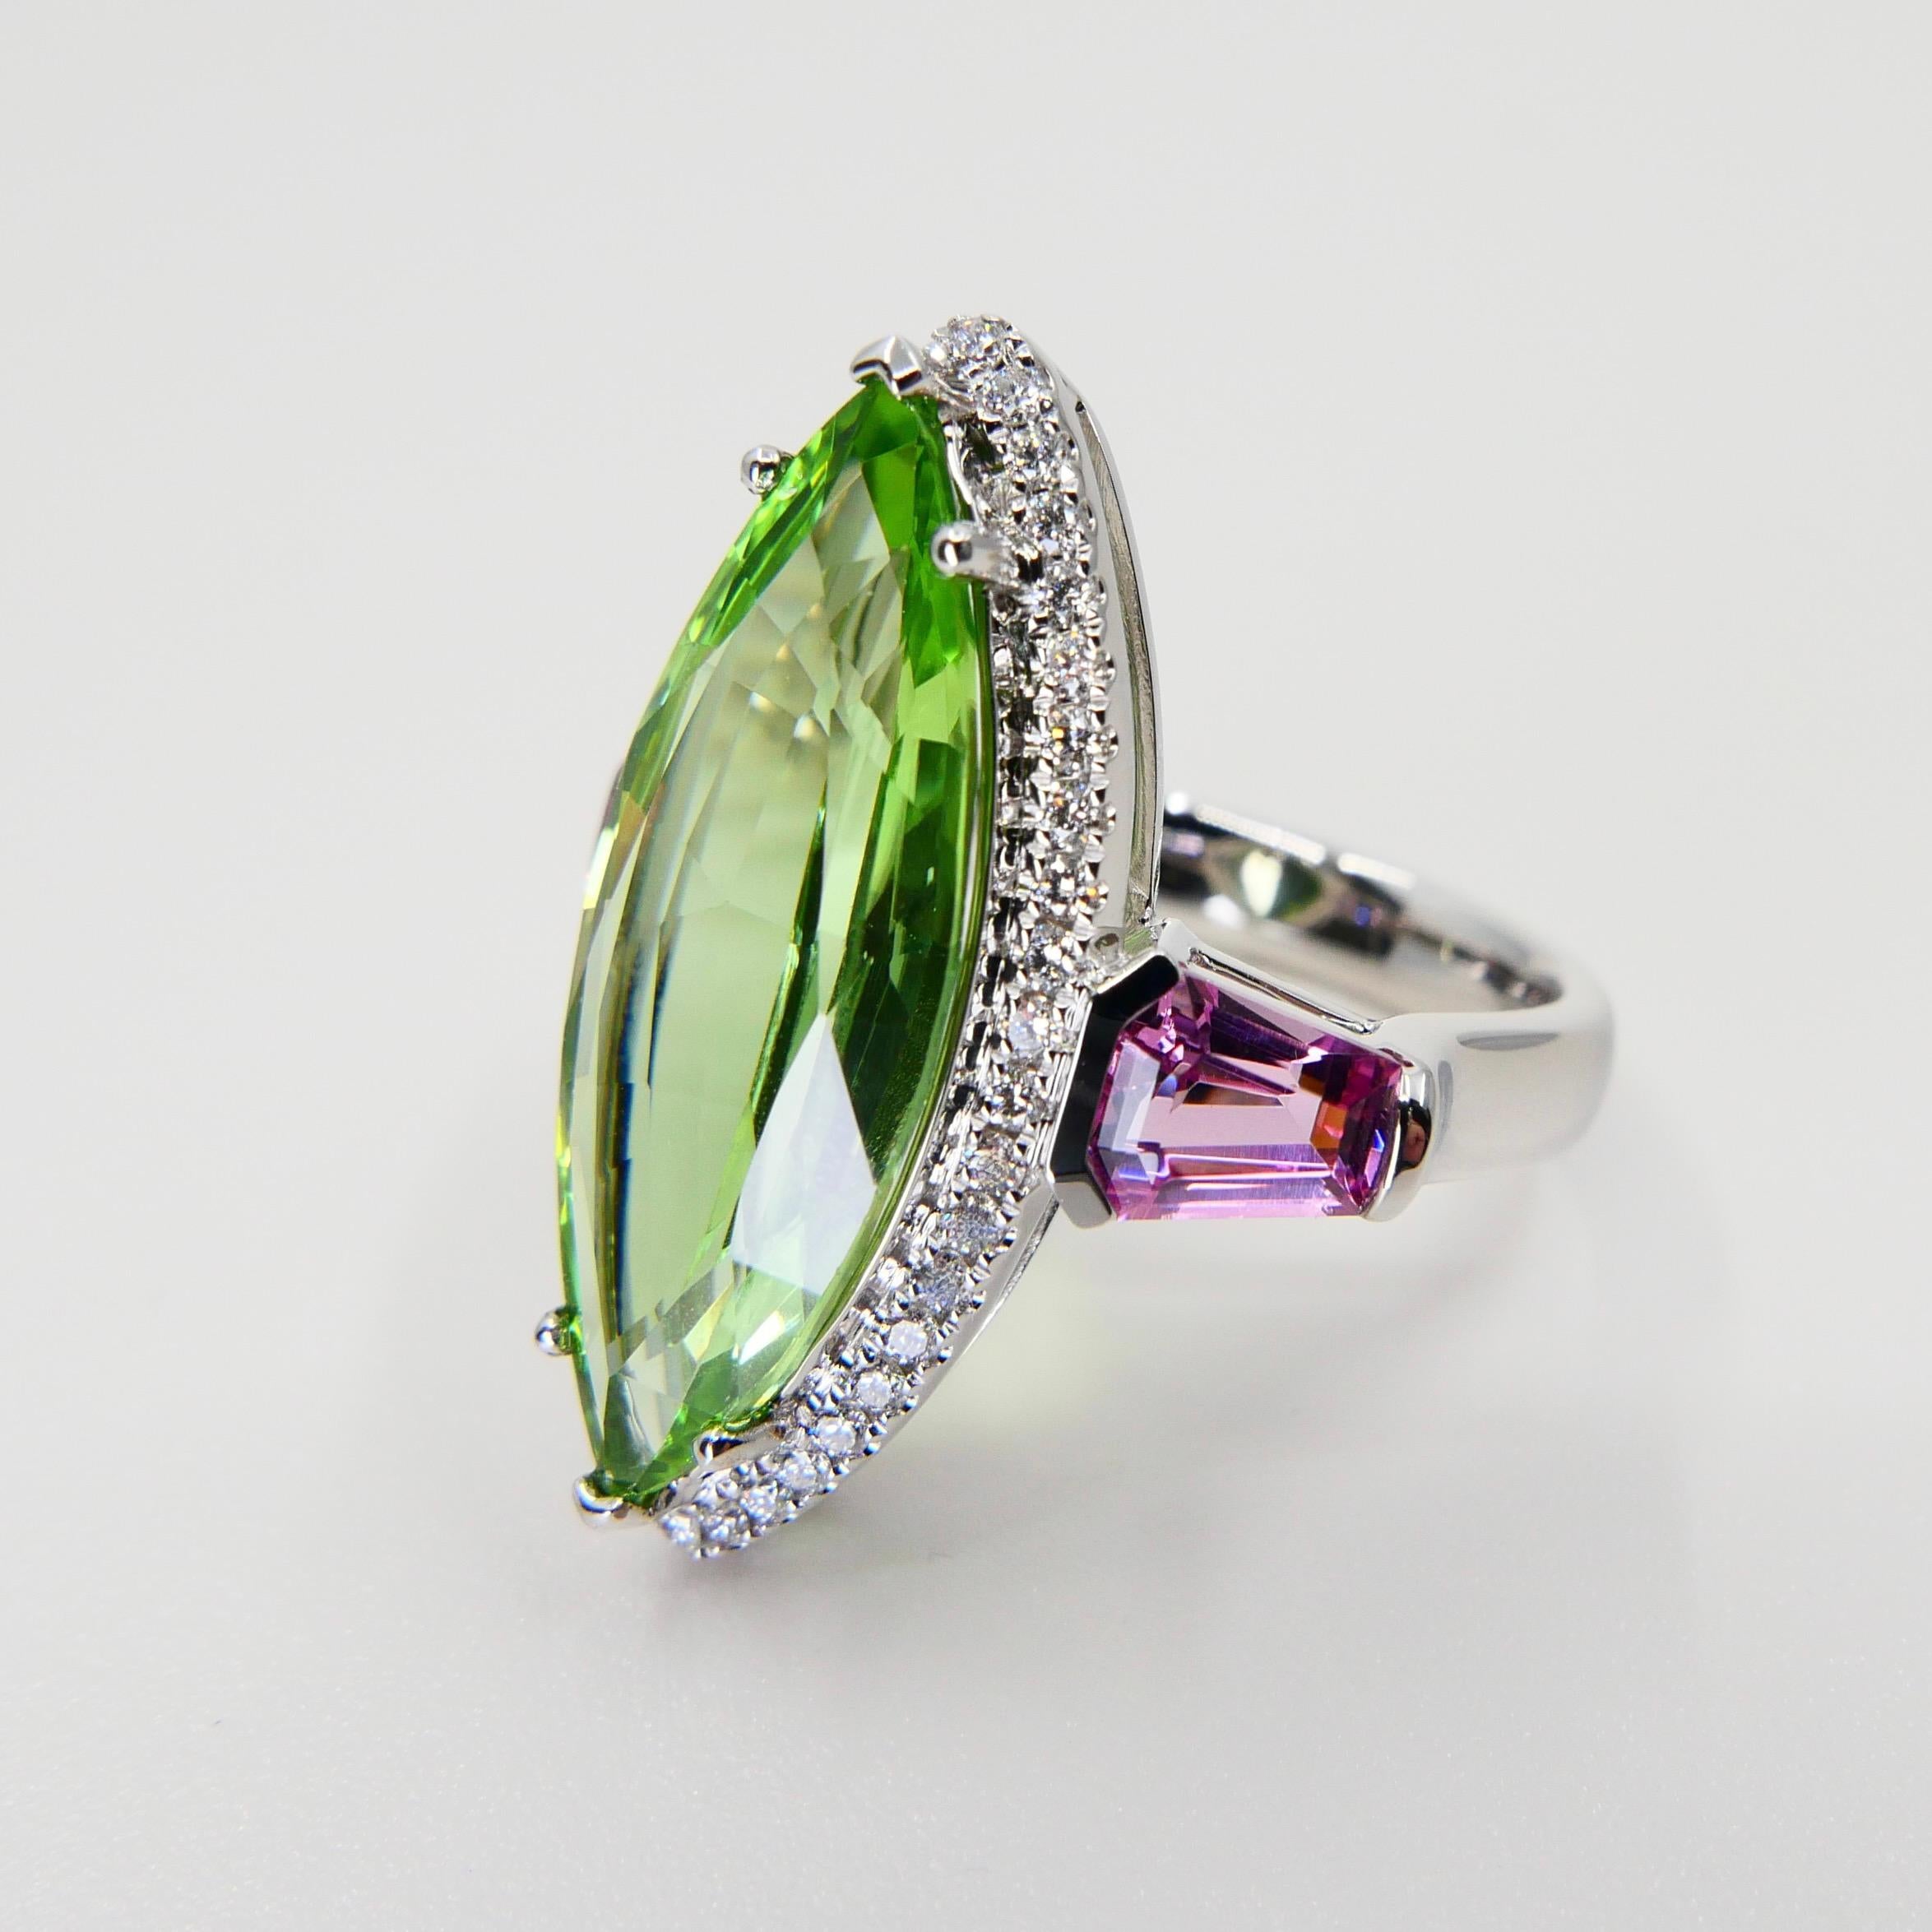 Natural Peridot 7.38 Cts, Pink Spinel & Diamond Cocktail Ring, Statement Piece 6